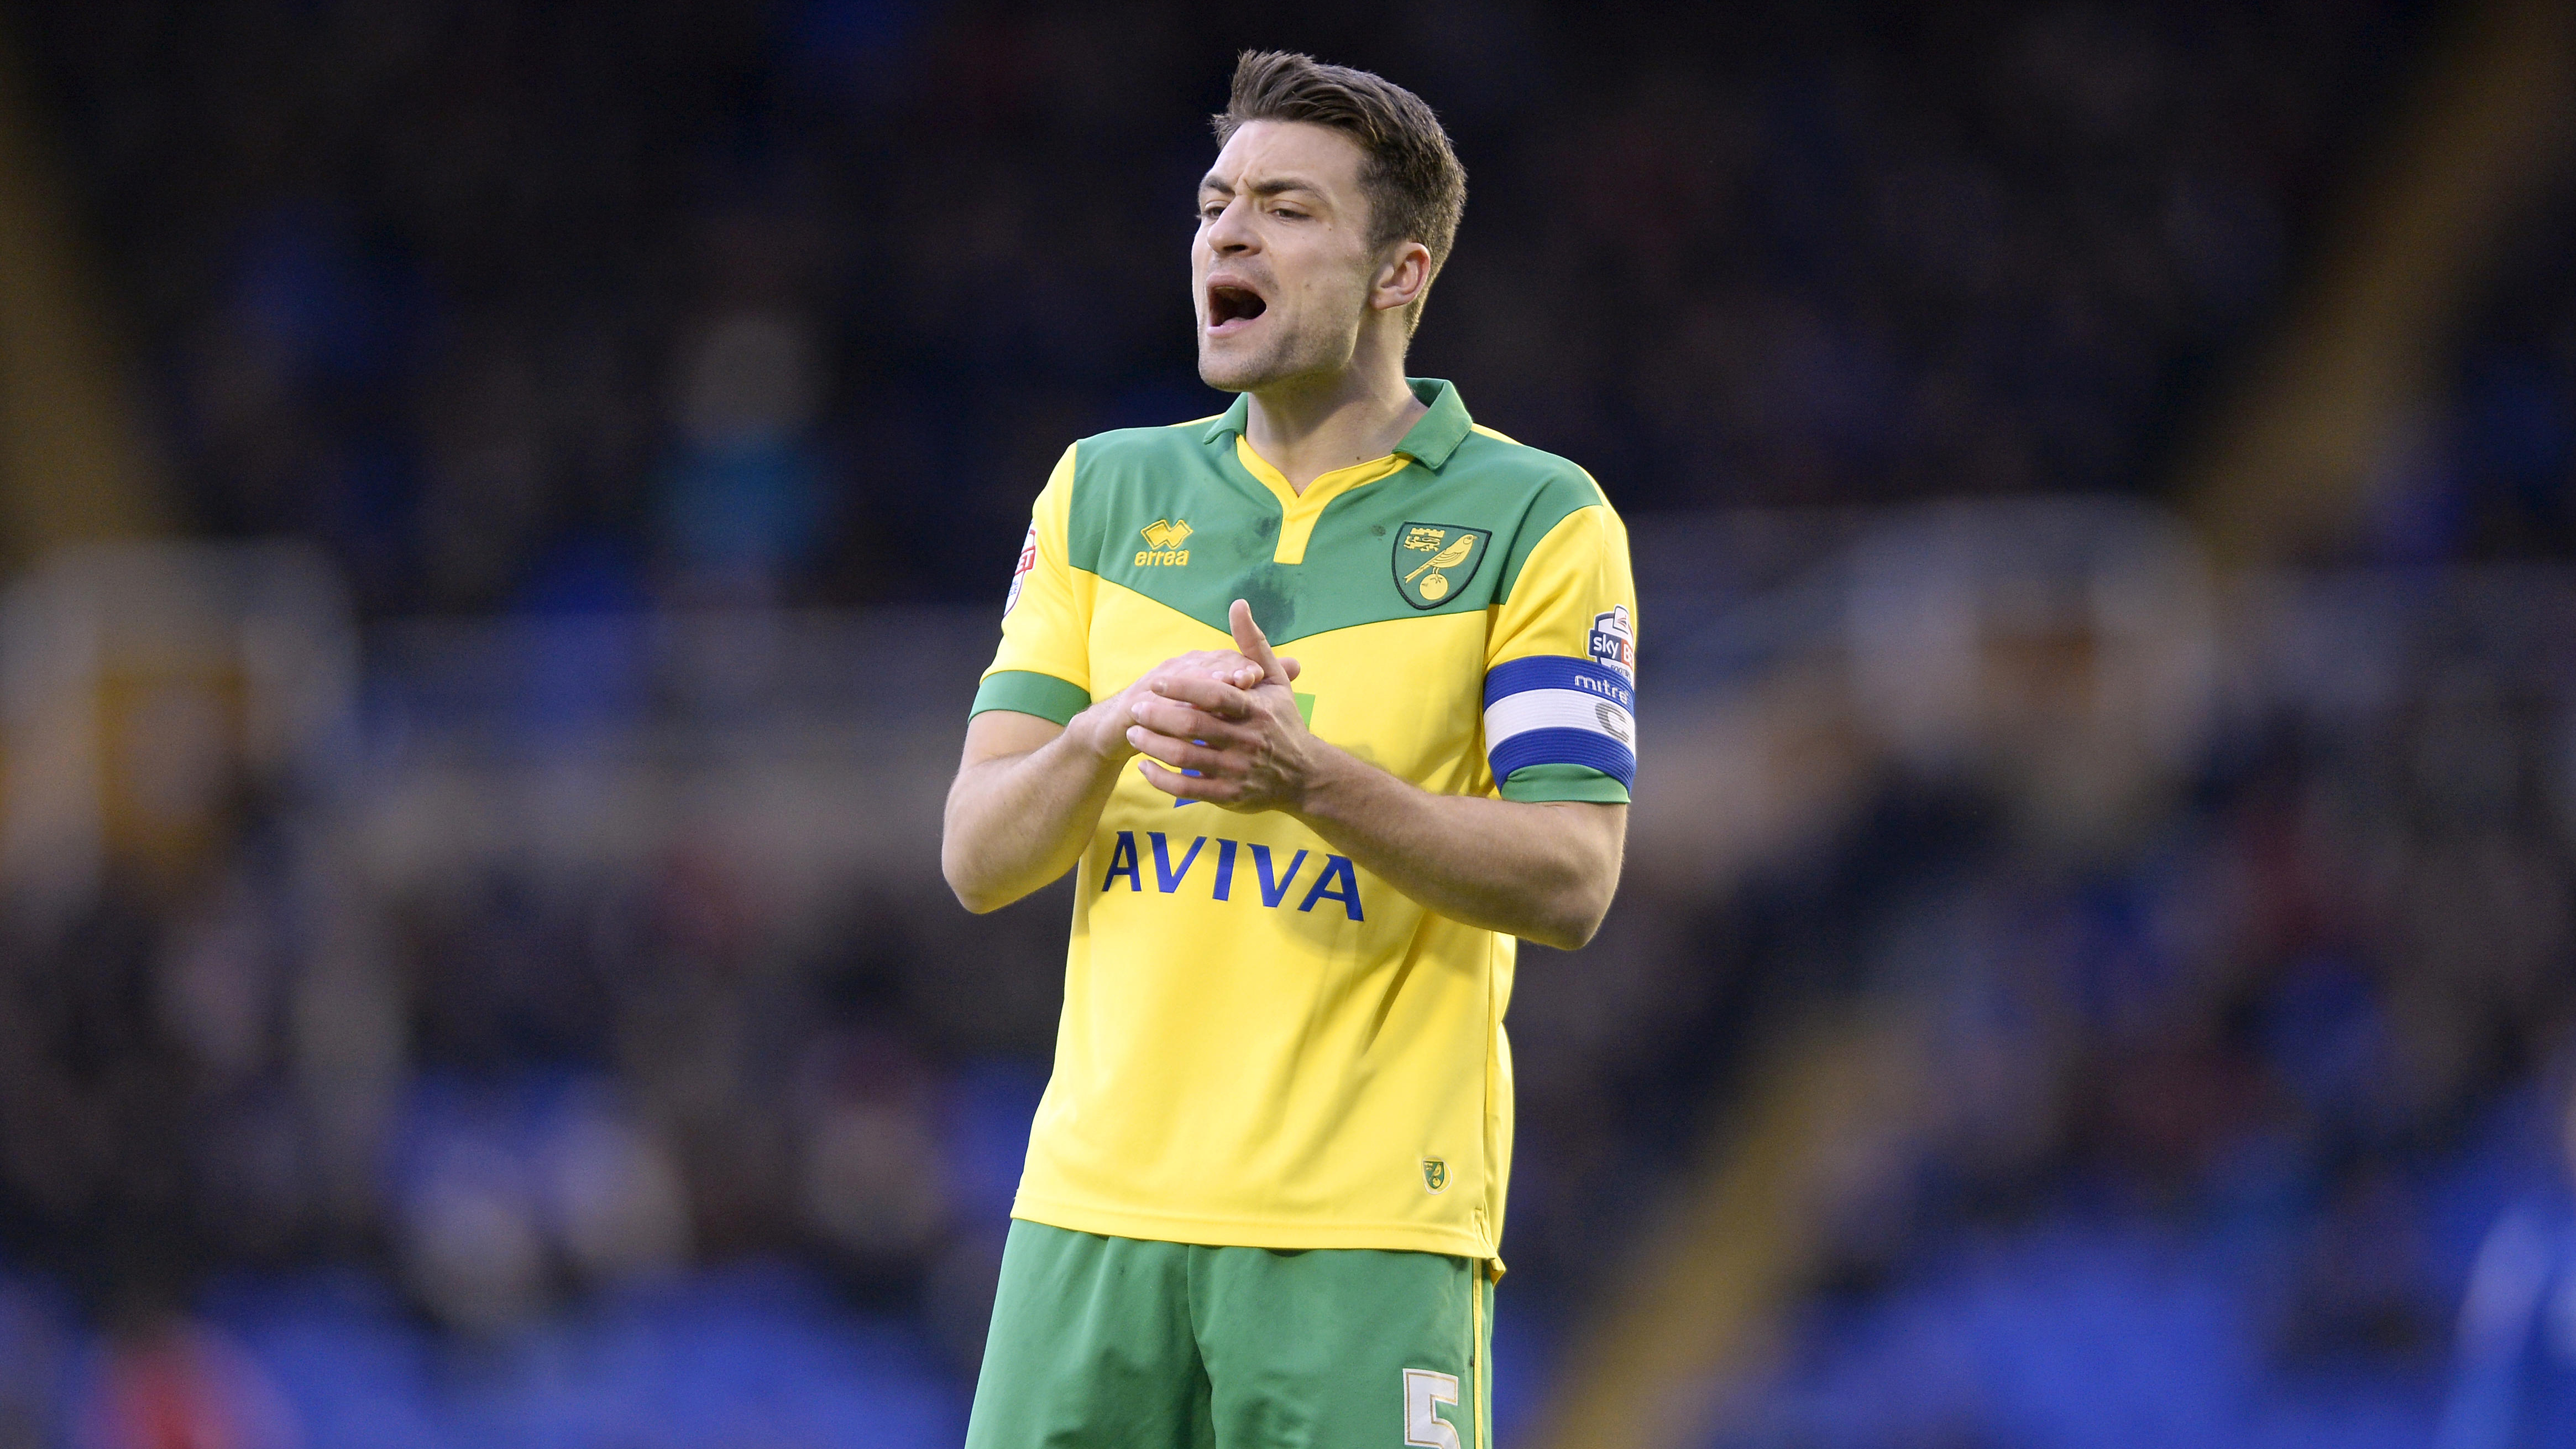 Russell Martin, I had great times at Norwich, but the focus is on us